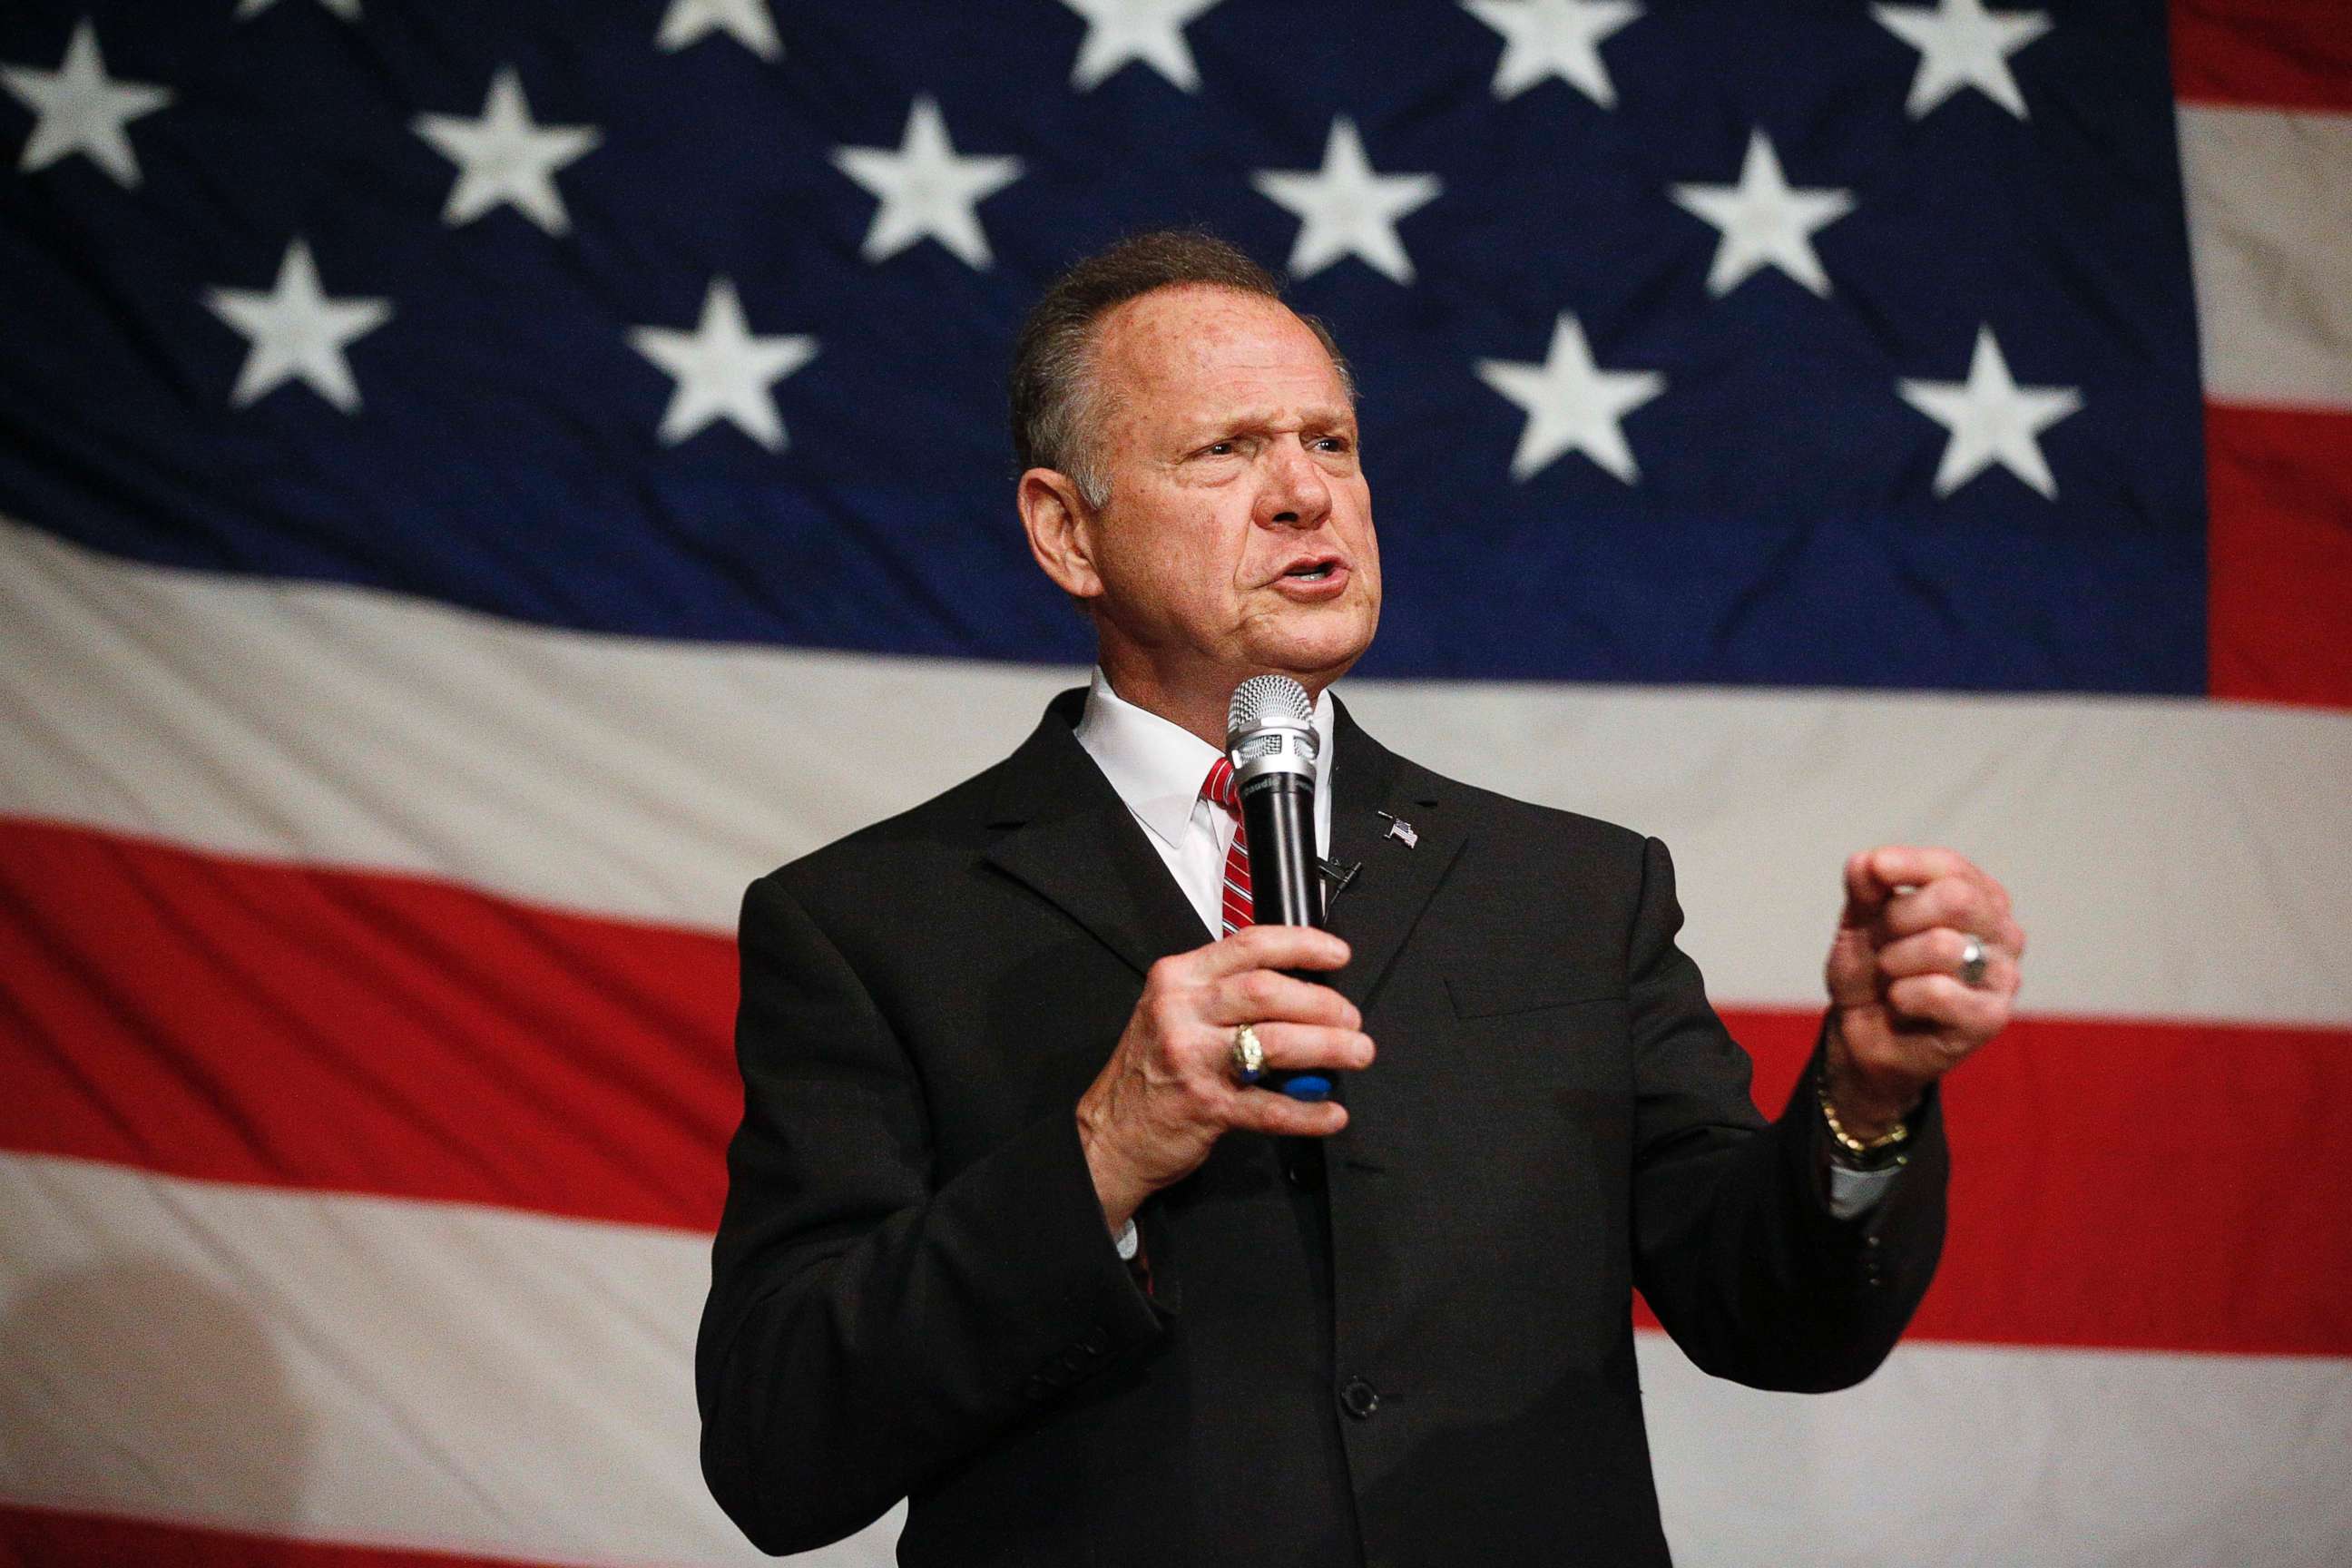 PHOTO: U.S. Senate candidate Roy Moore speaks at a campaign rally, Dec. 5, 2017, in Fairhope, Ala.